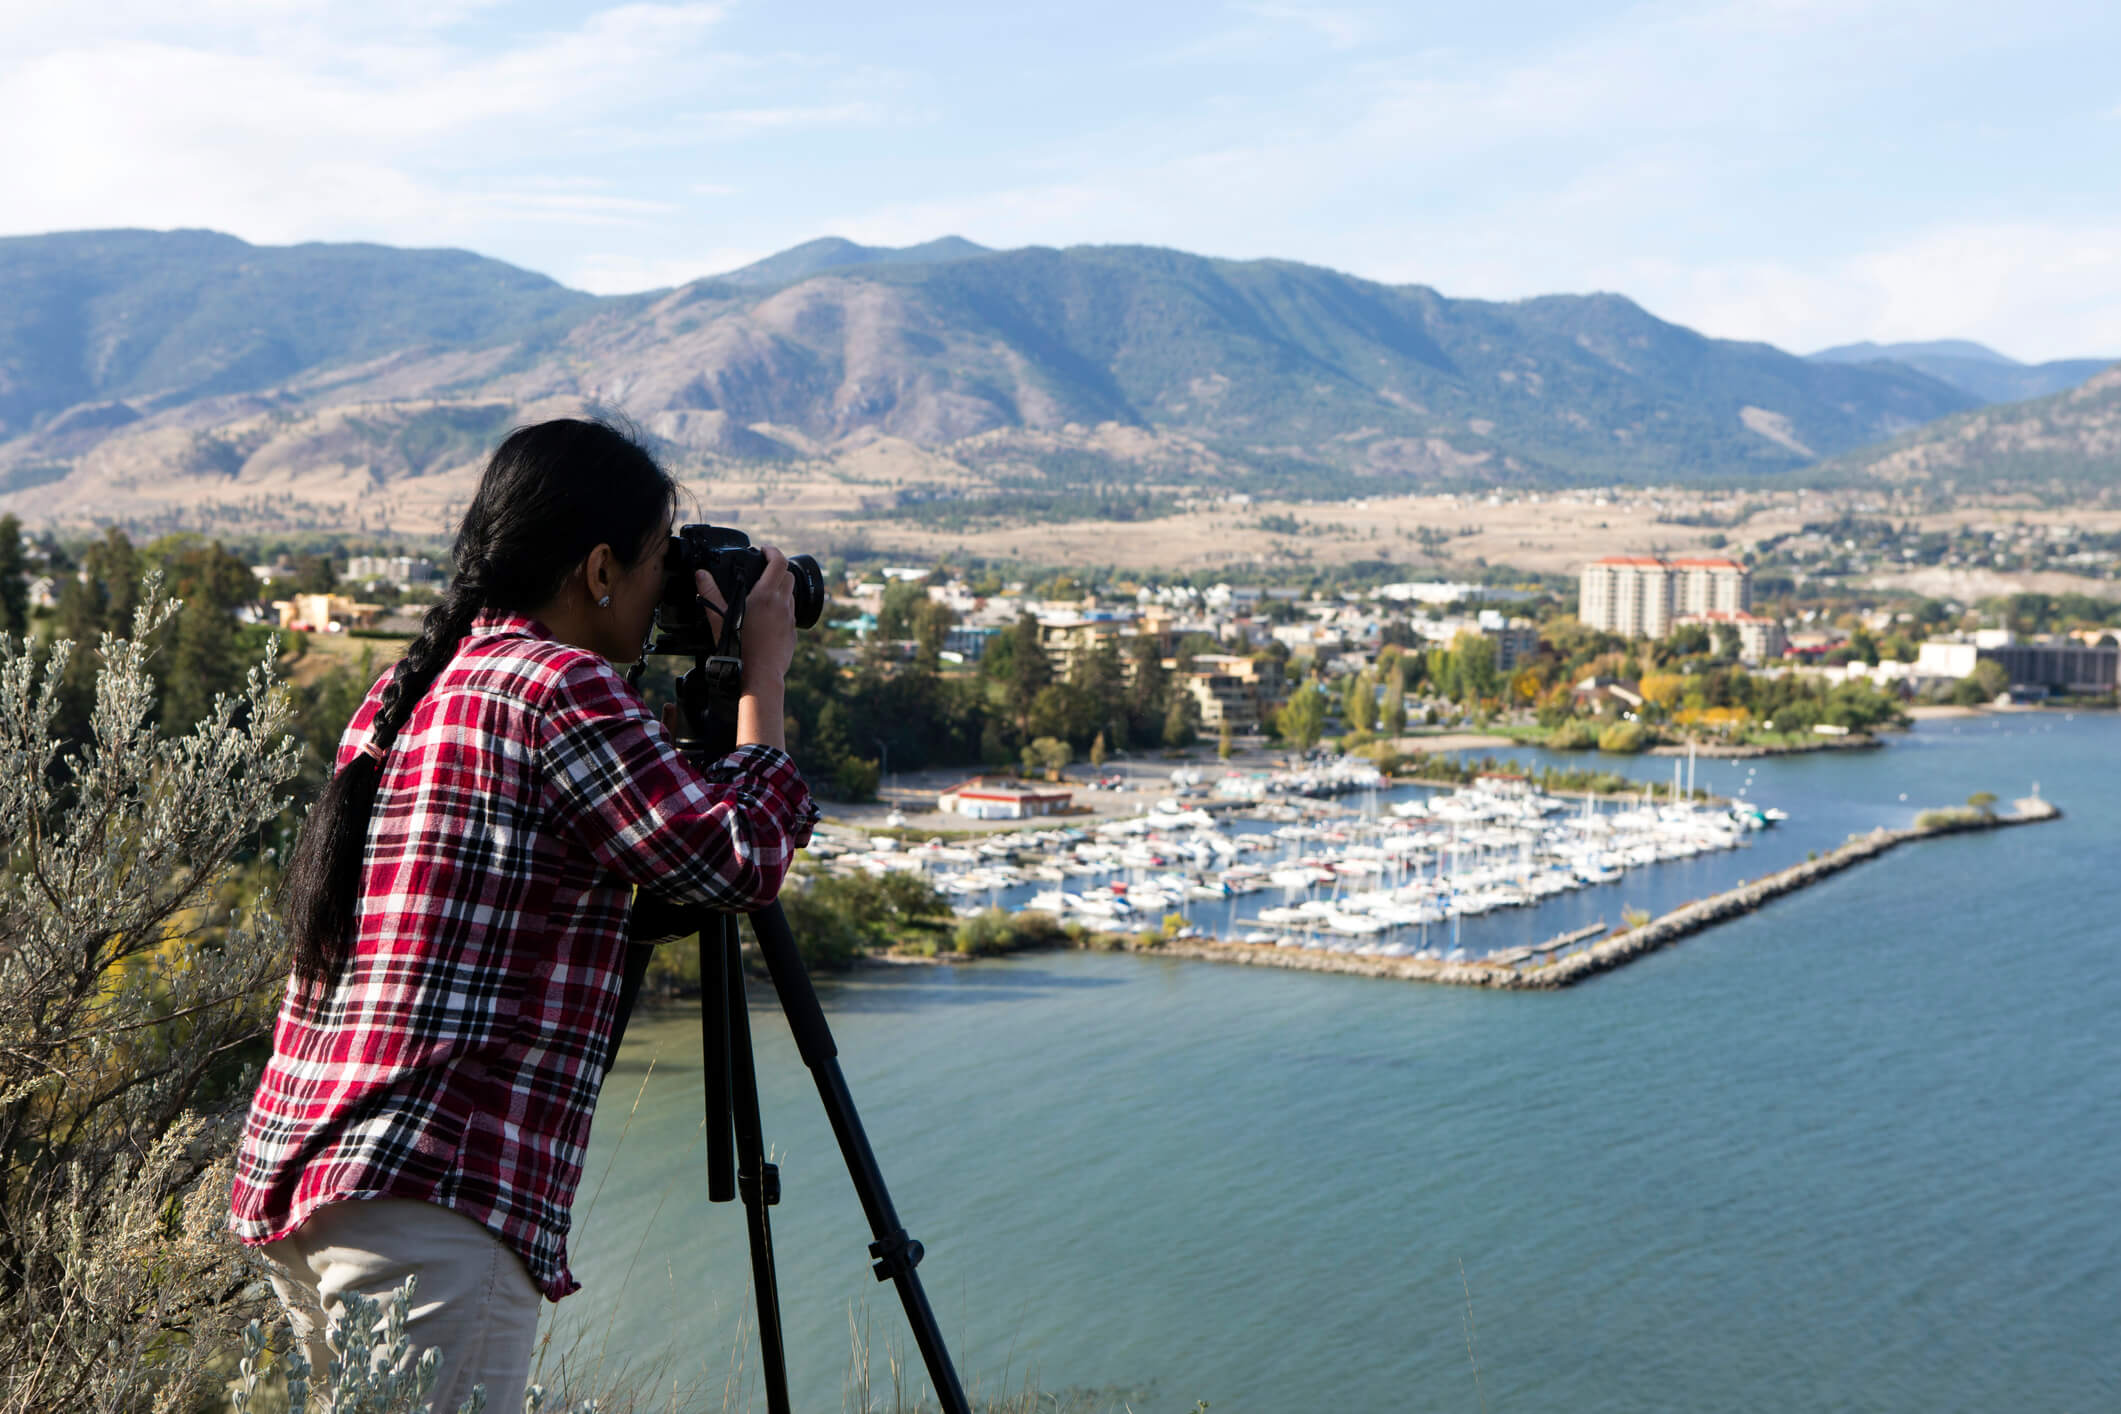 Person takes photo overlooking water and city, with mountains in the background